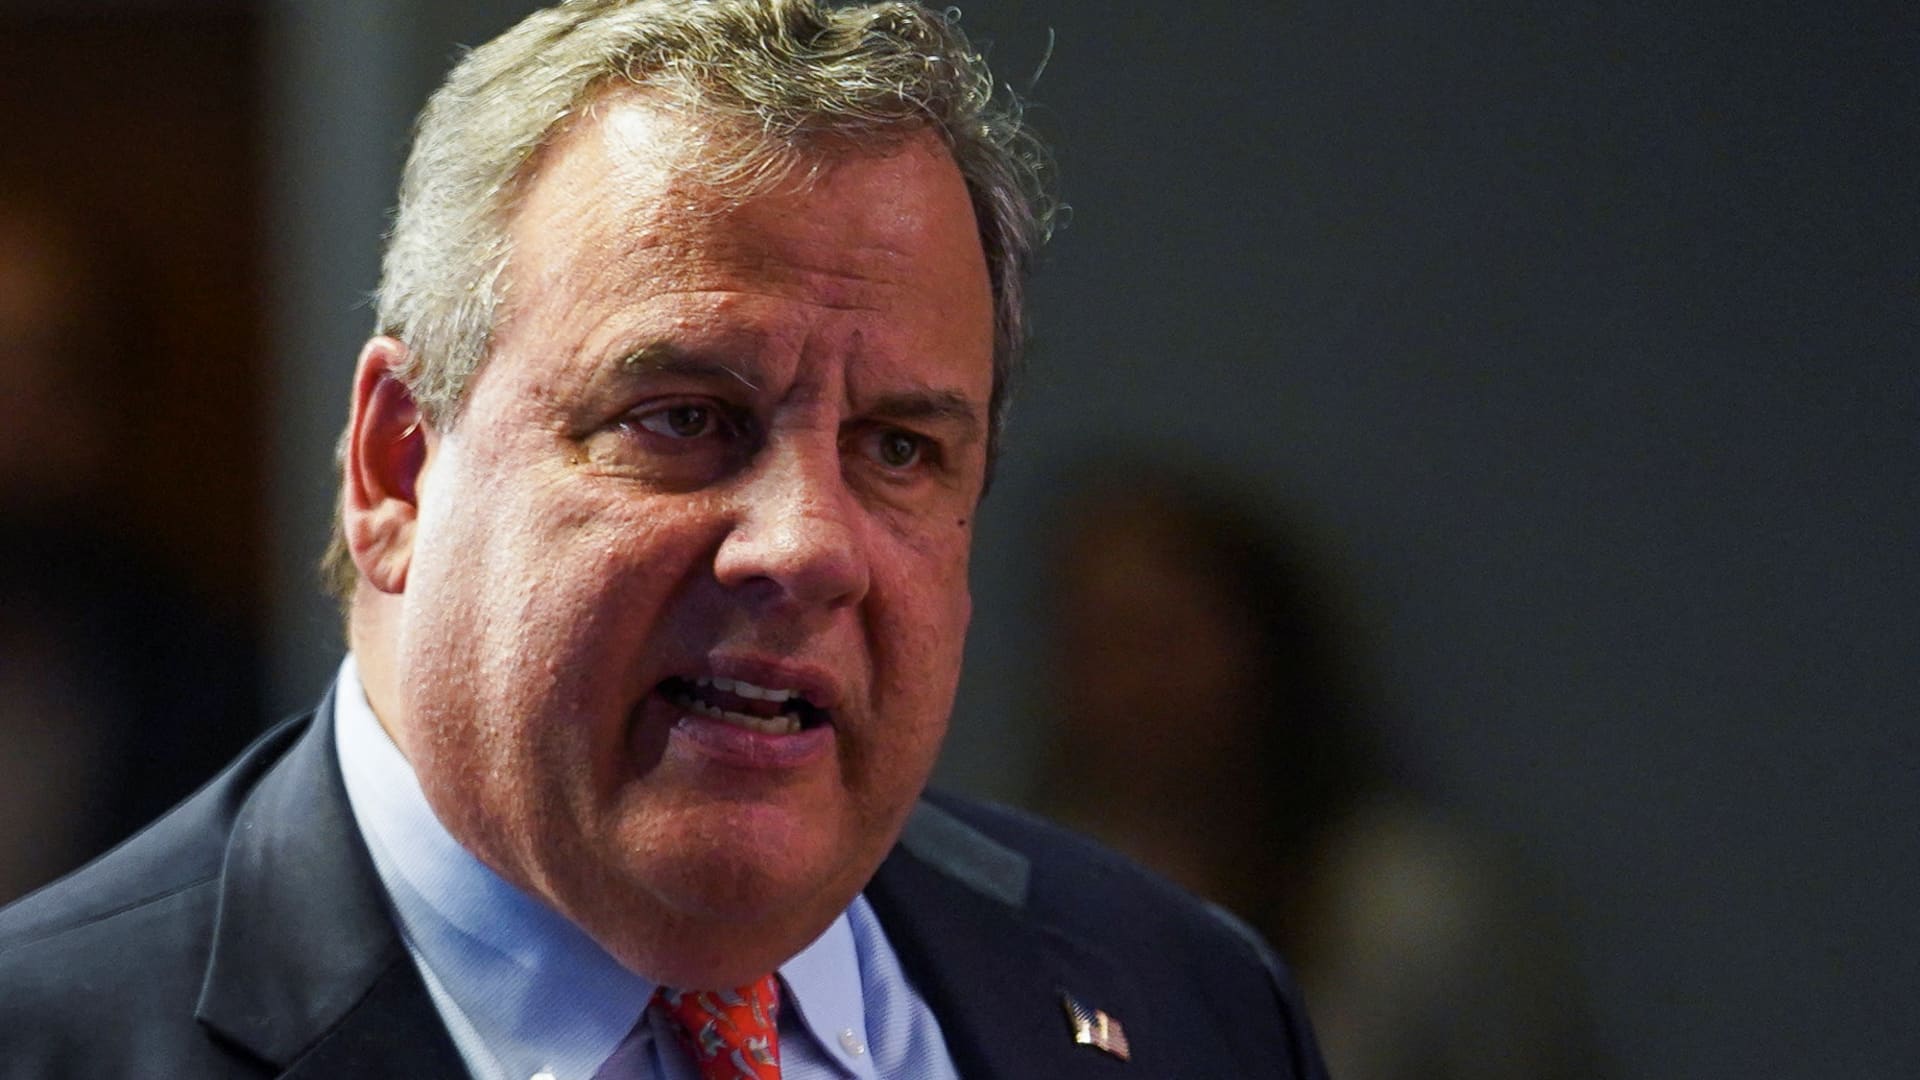 Former New Jersey Governor Chris Christie launches his bid for the 2024 Republican presidential nomination at the New Hampshire Institute of Politics in Manchester, New Hampshire, U.S., June 6, 2023. 